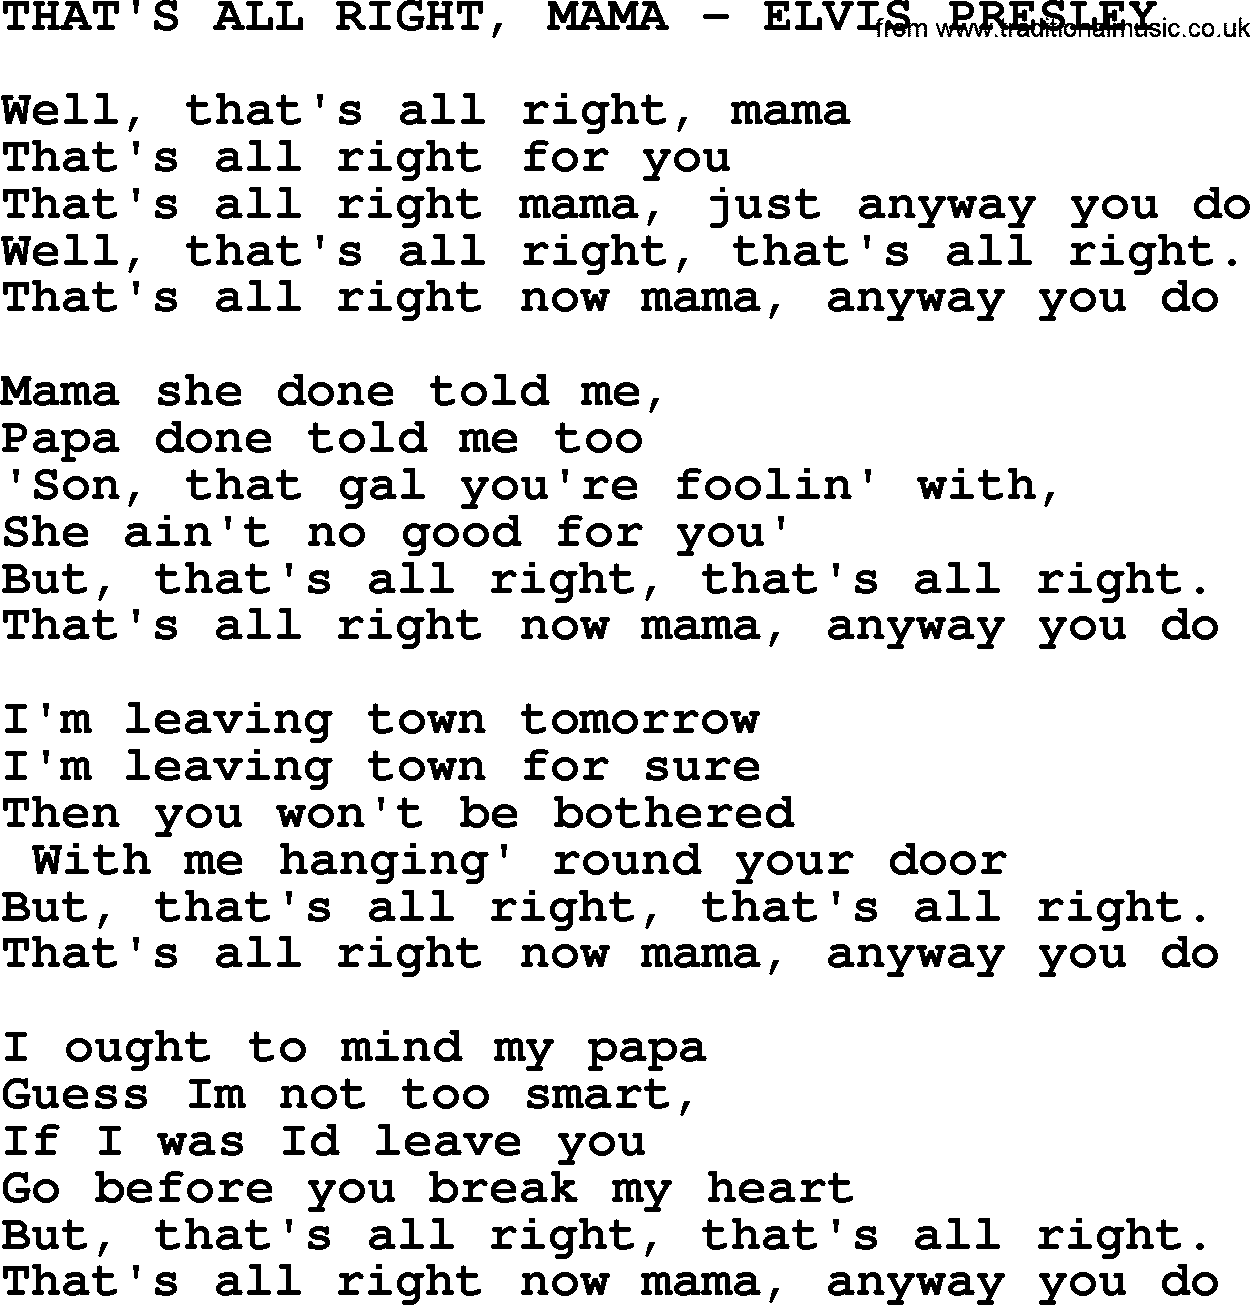 Elvis Presley song: That's All Right, Mama-Elvis Presley-.txt lyrics and chords